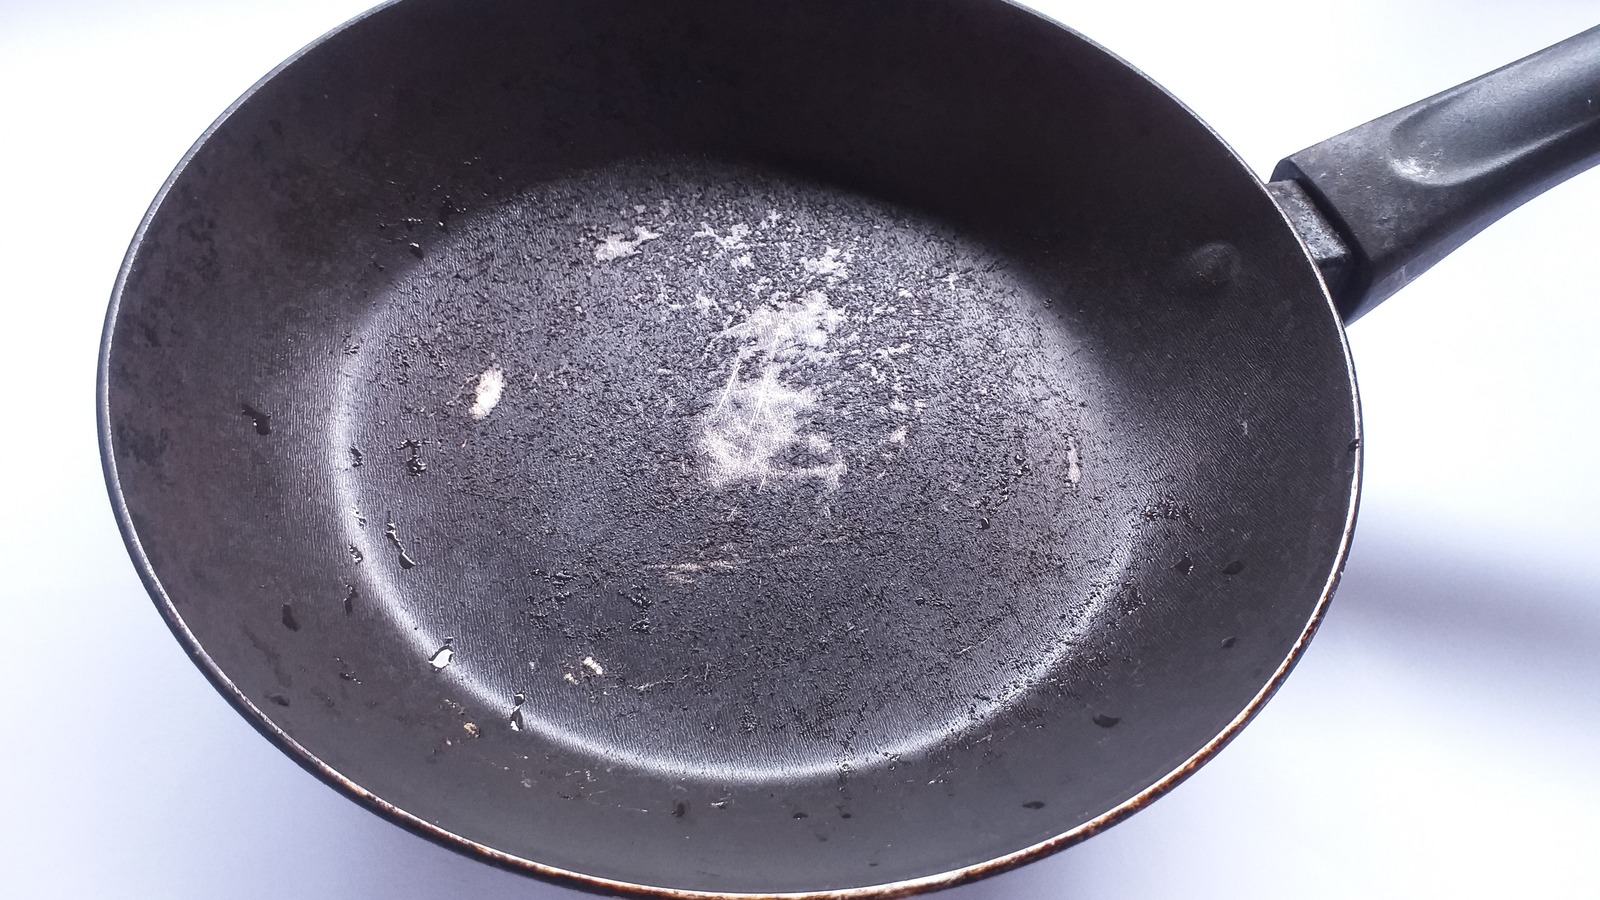 https://www.mashed.com/img/gallery/the-salt-hack-that-could-save-your-nonstick-pan/l-intro-1677007139.jpg